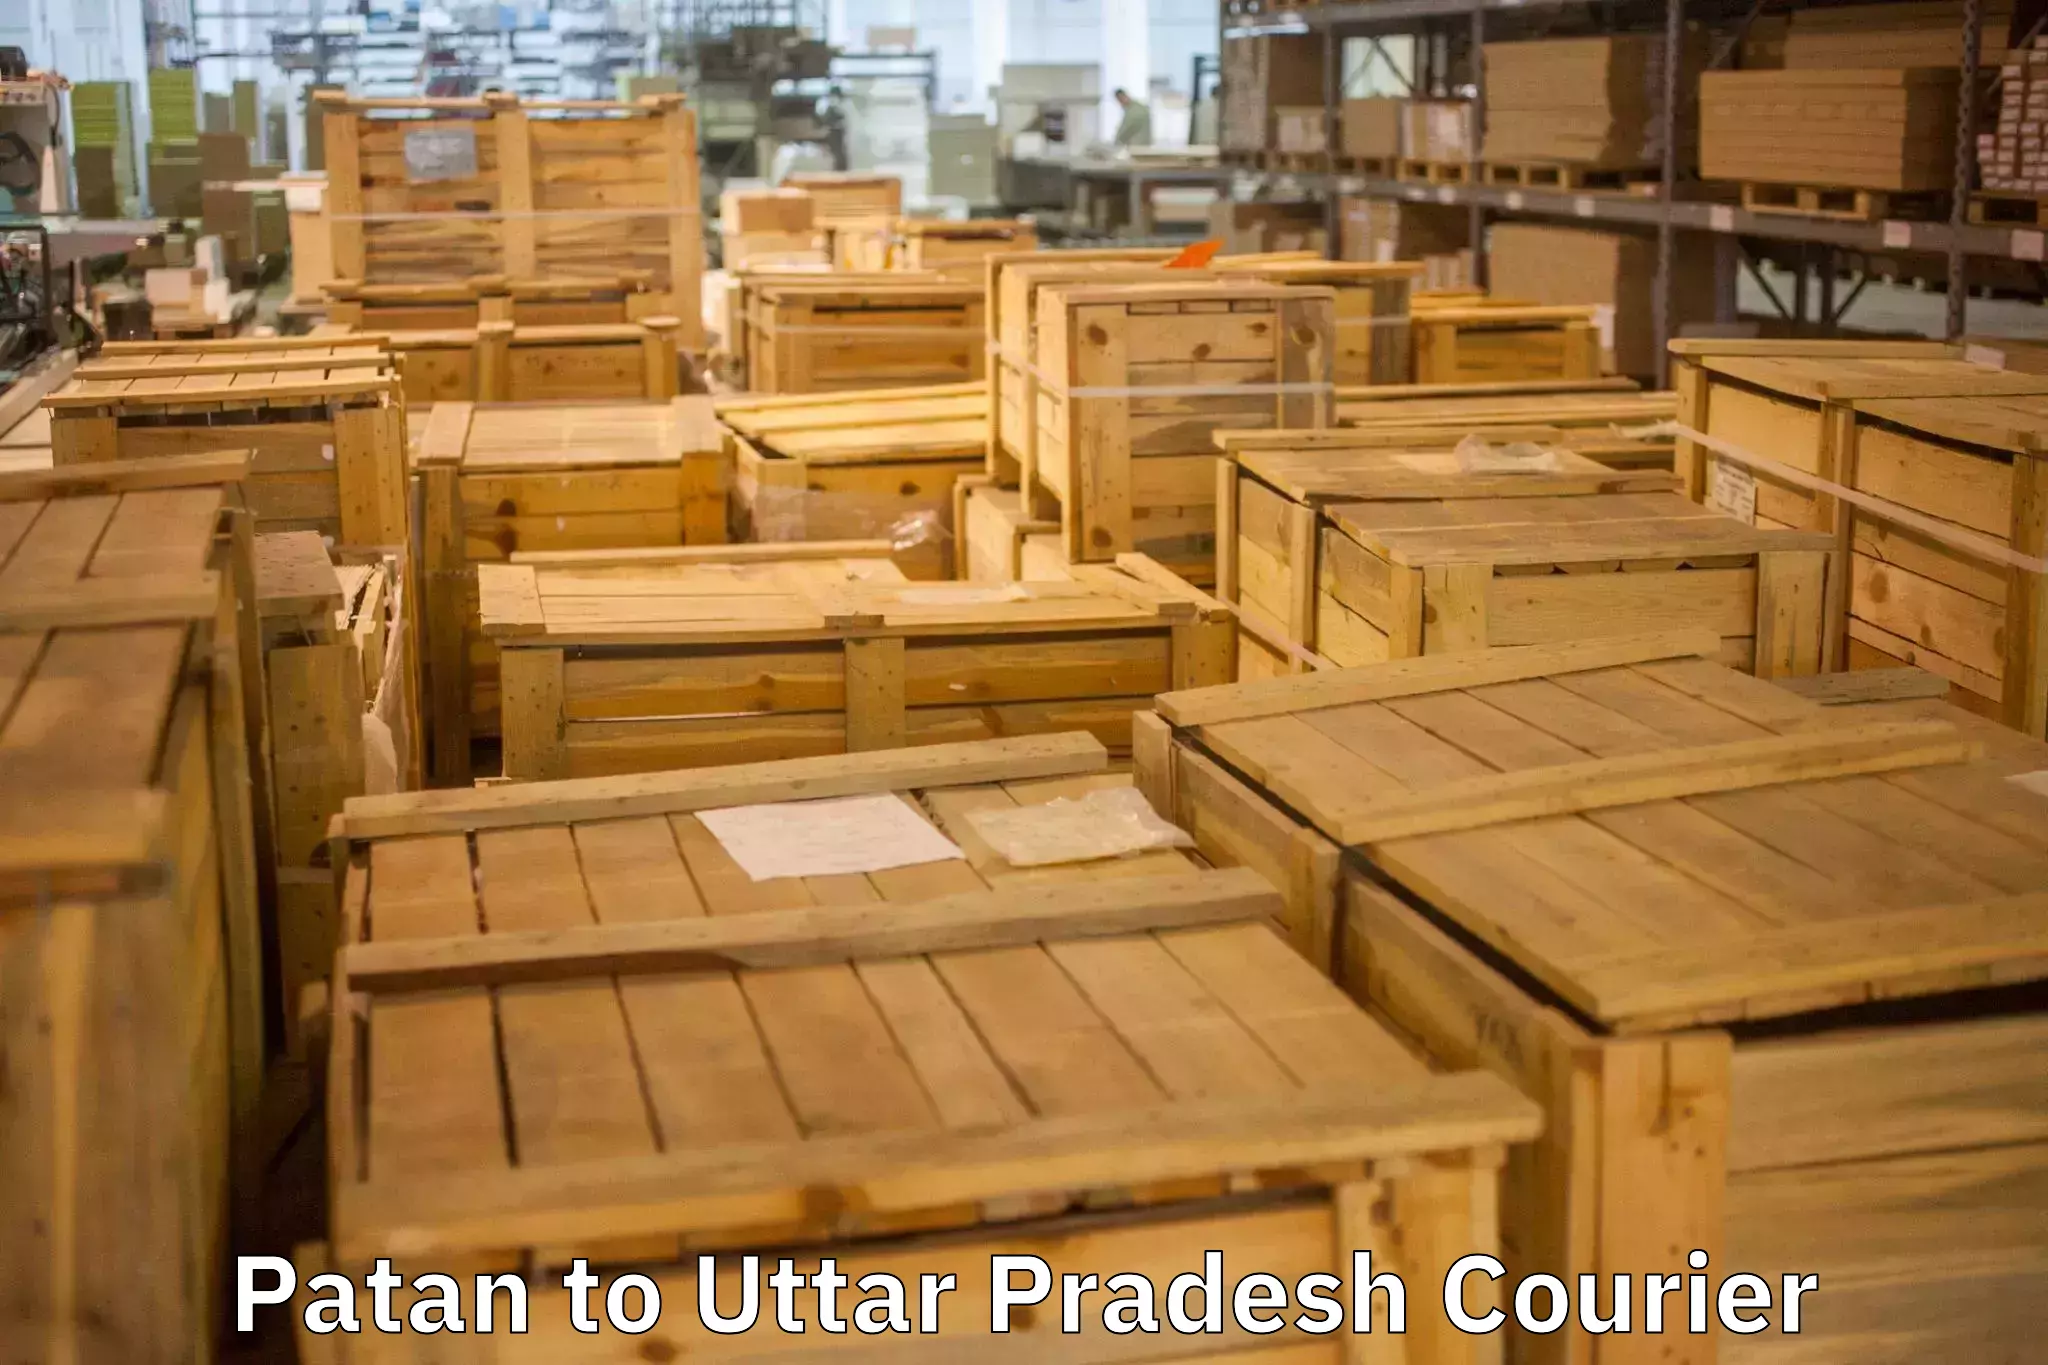 Hassle-free relocation Patan to Kanth